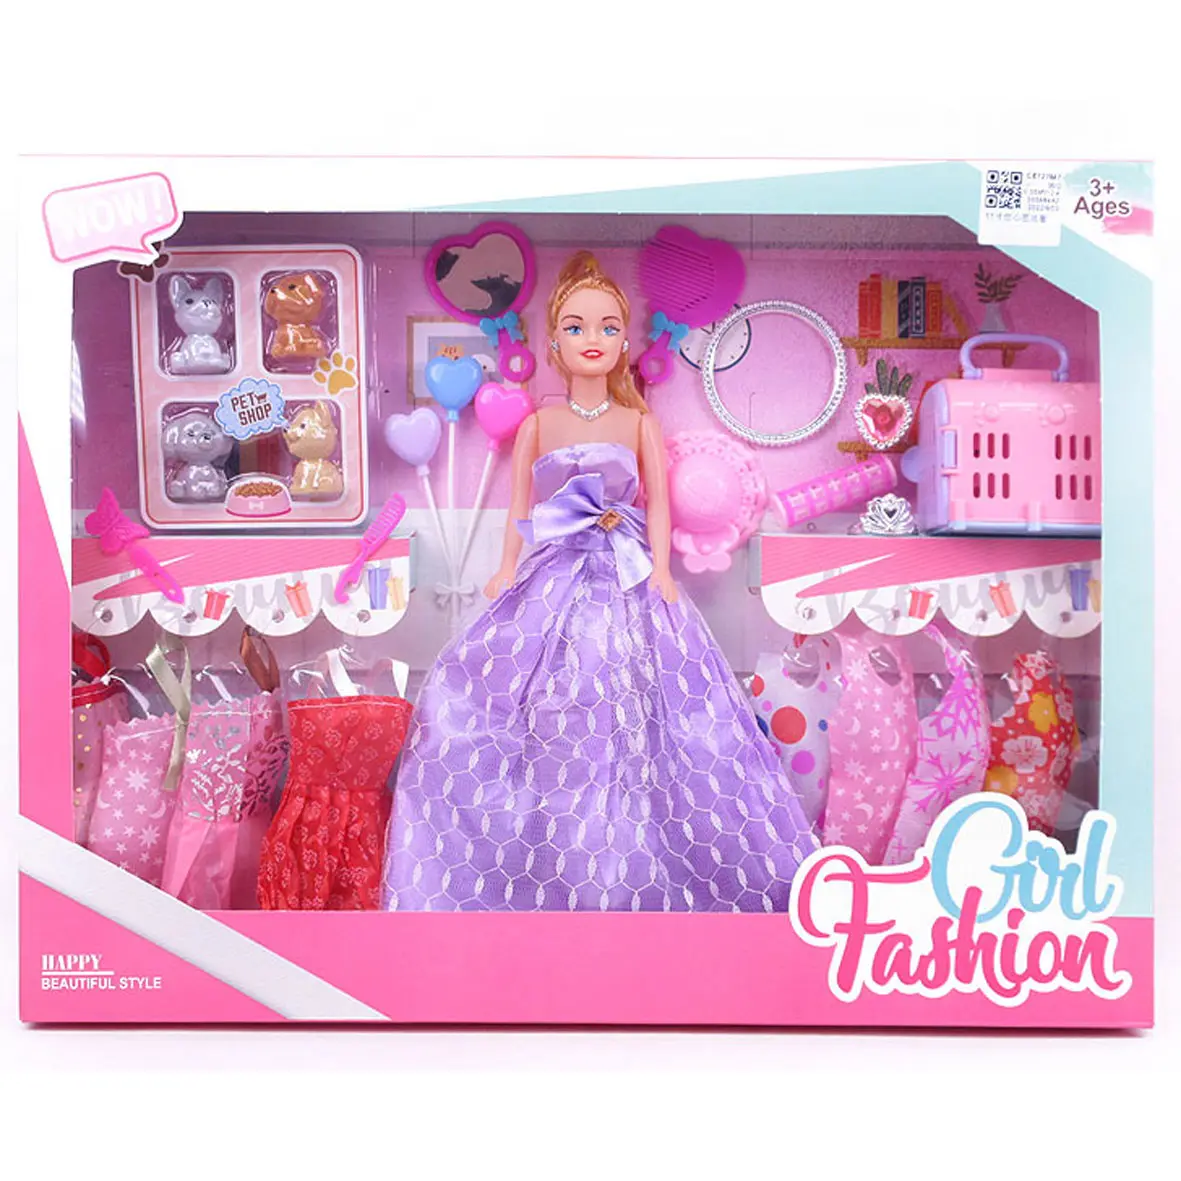 Jinming Lovely Doll Dress Lady Fashion Model Doll for Girl Change Game Pink PVC Plastic Doll Set with Clothes and Suitcase Girls